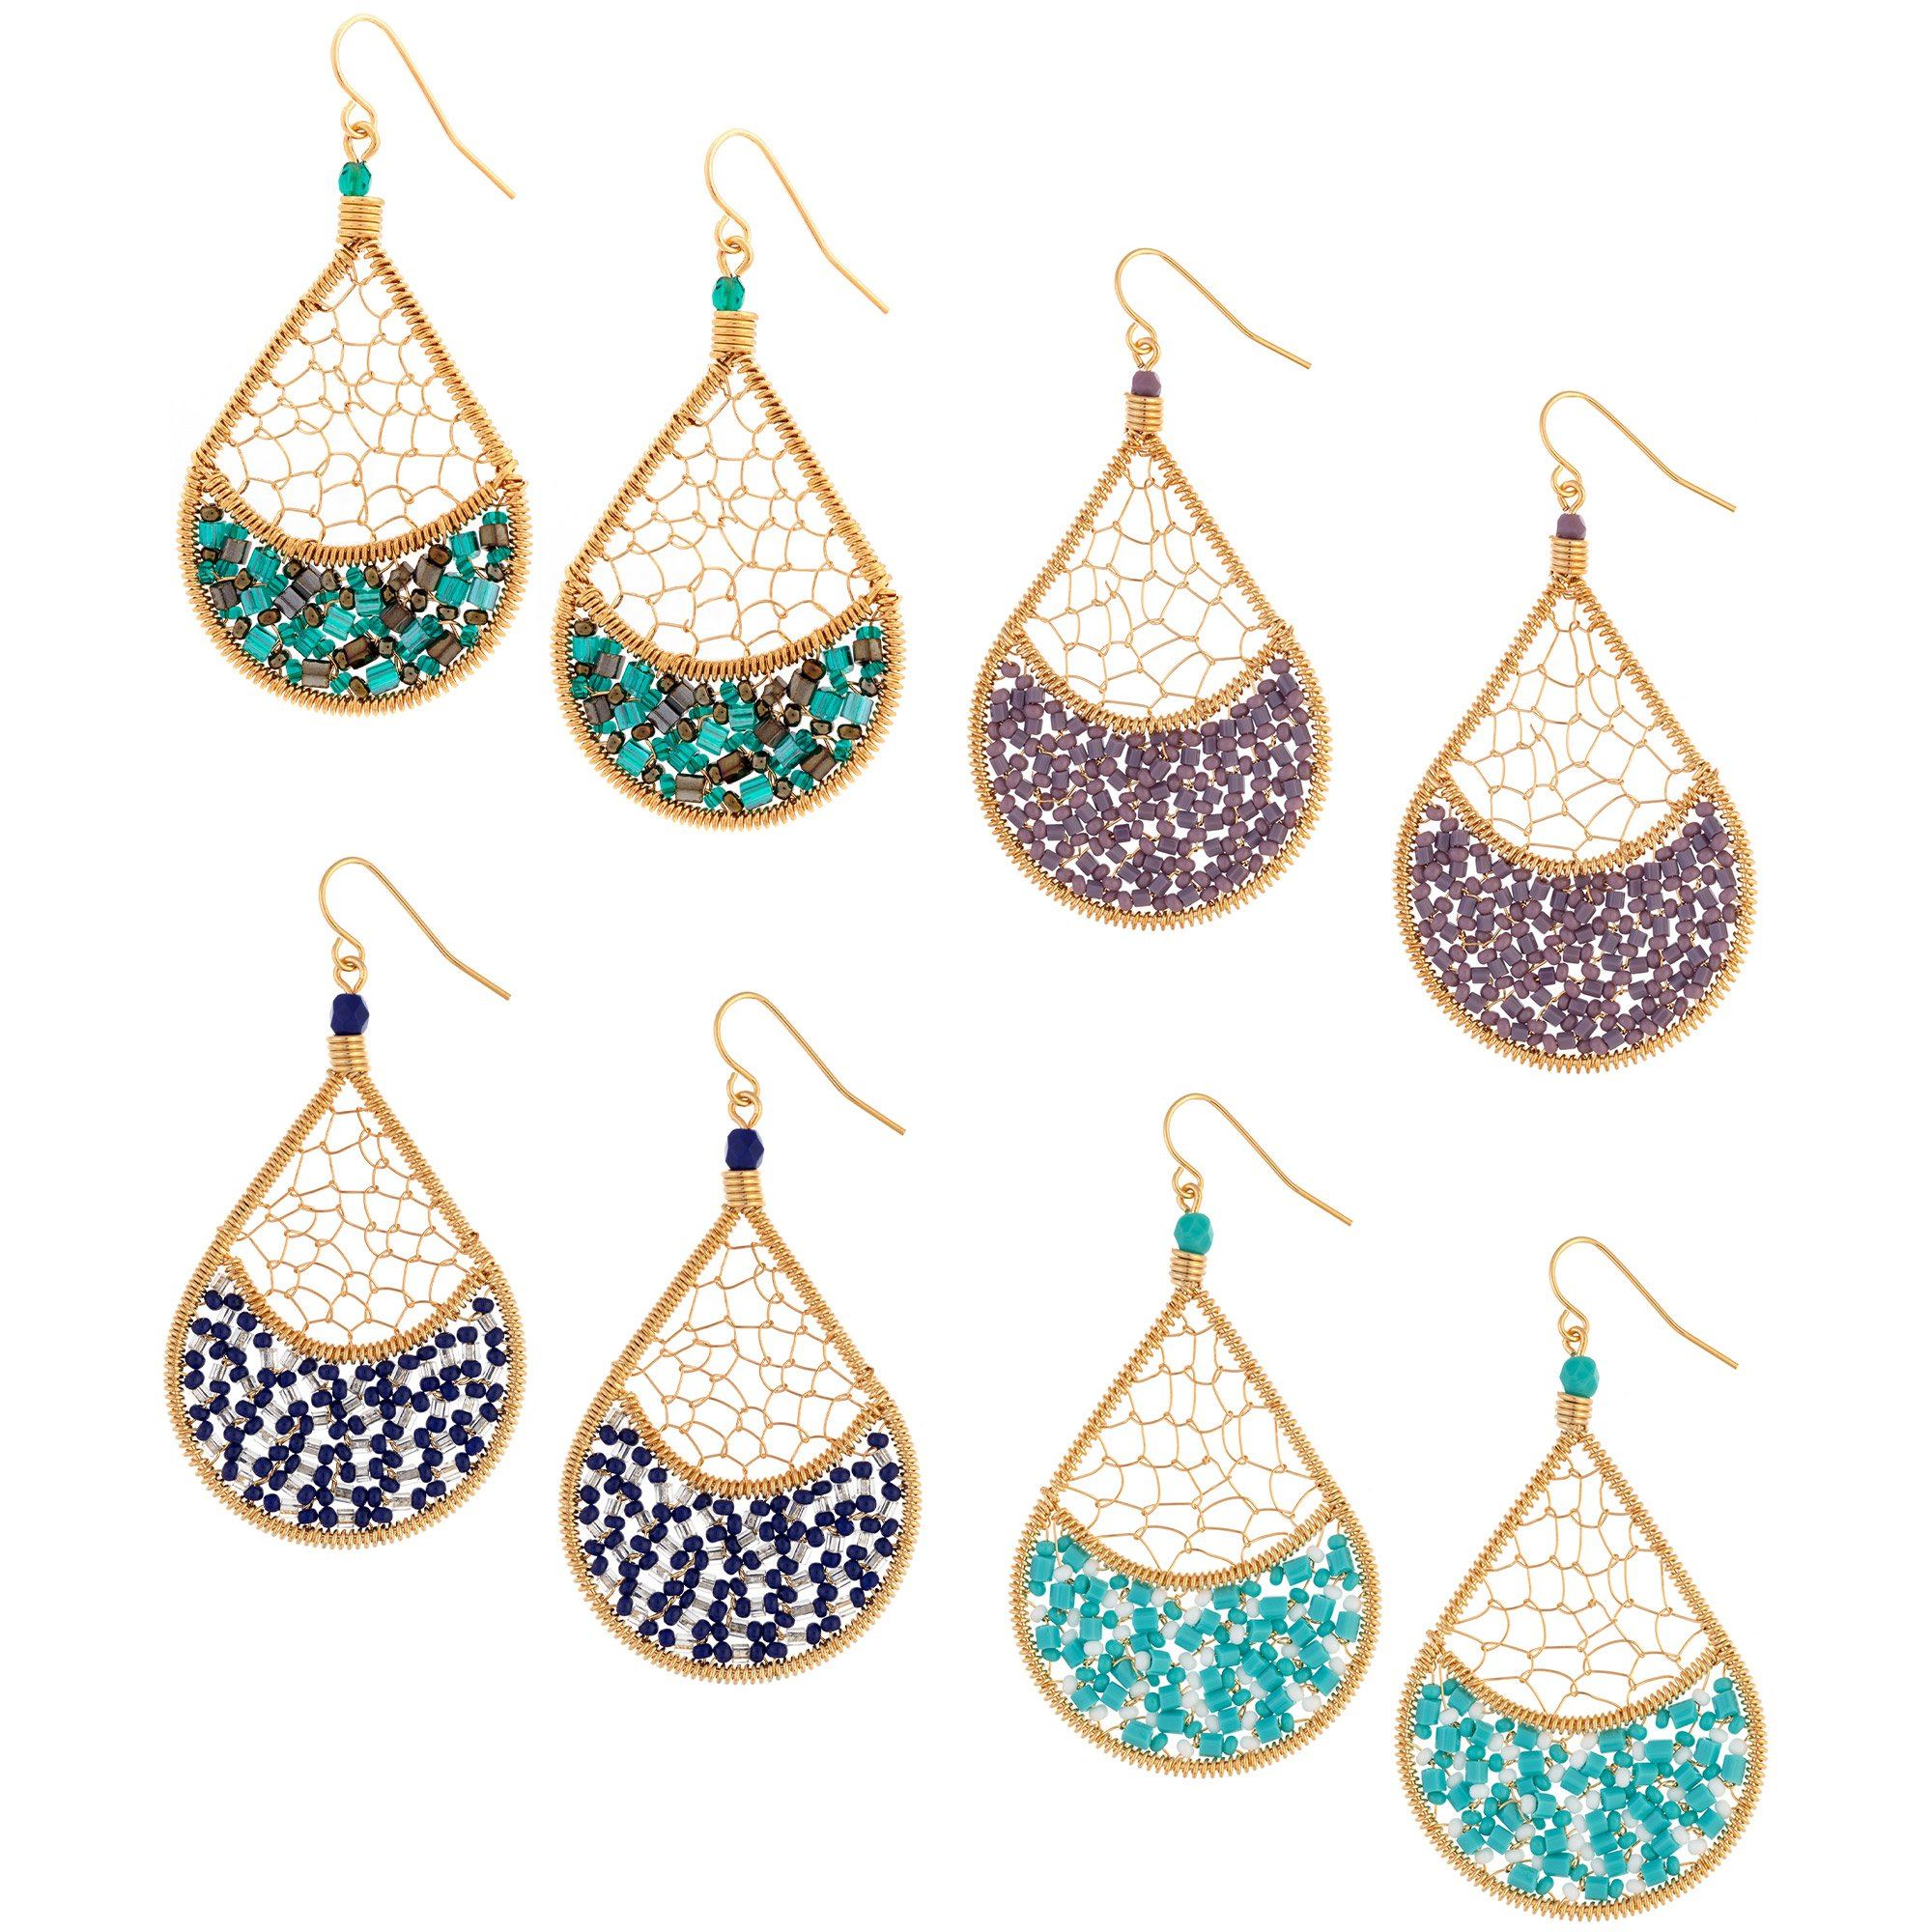 Threads & Beads Gold-Plated Earrings - Turquoise